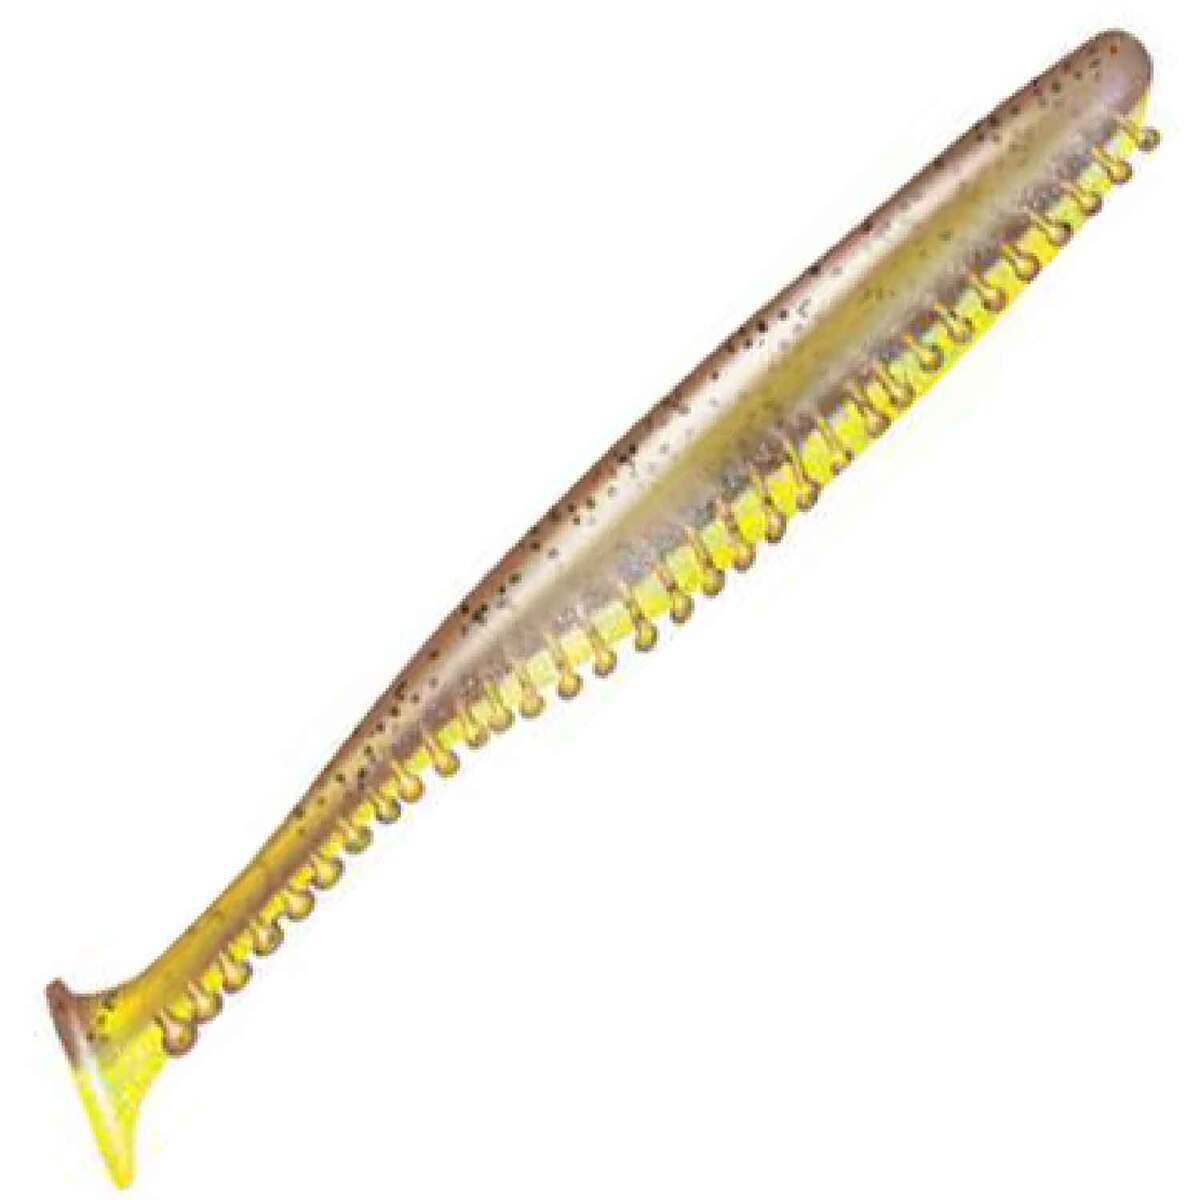 Kalin's Tickle Tail Paddle Tail Swimbait - 4.8in - Electric Blue/Chartreuse Tail